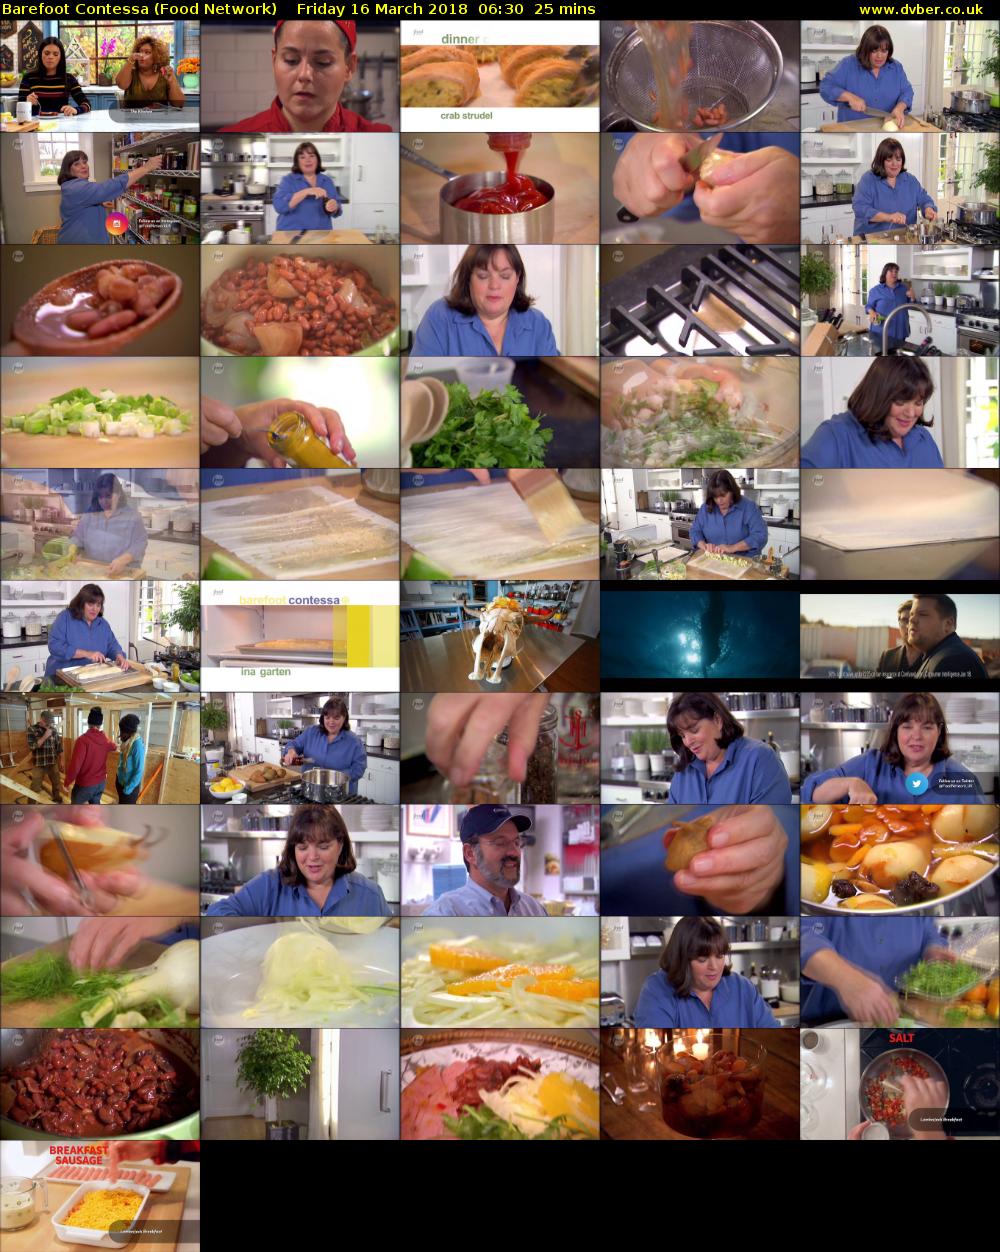 Barefoot Contessa (Food Network) Friday 16 March 2018 06:30 - 06:55